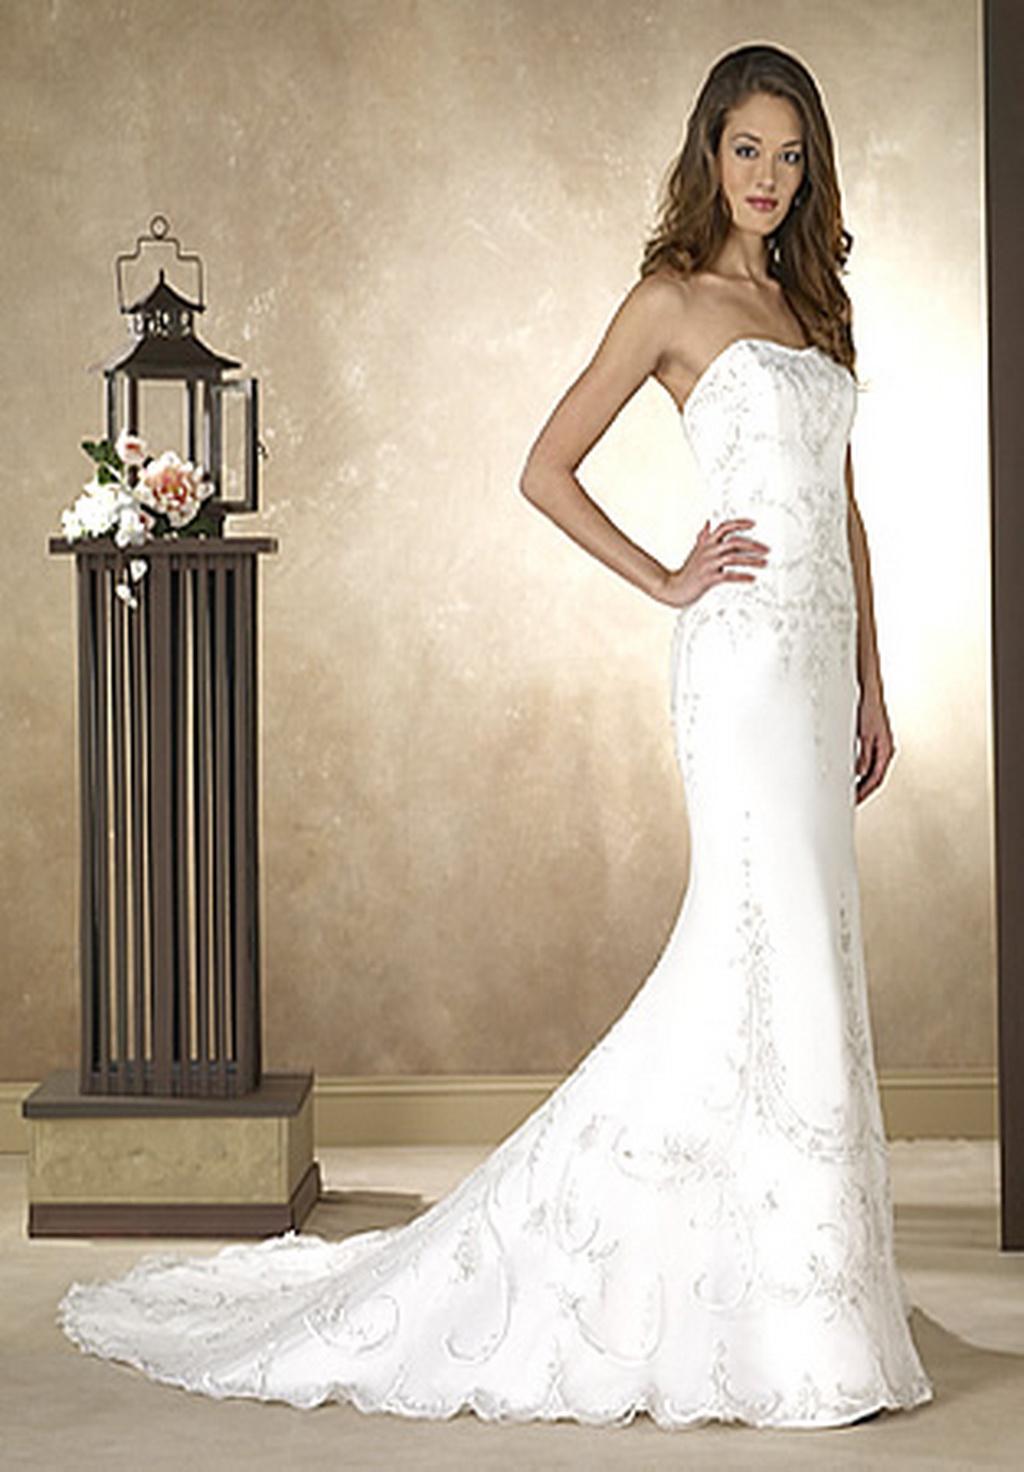 luxurious wedding gowns and elegant 1 540x776 luxurious wedding gowns and